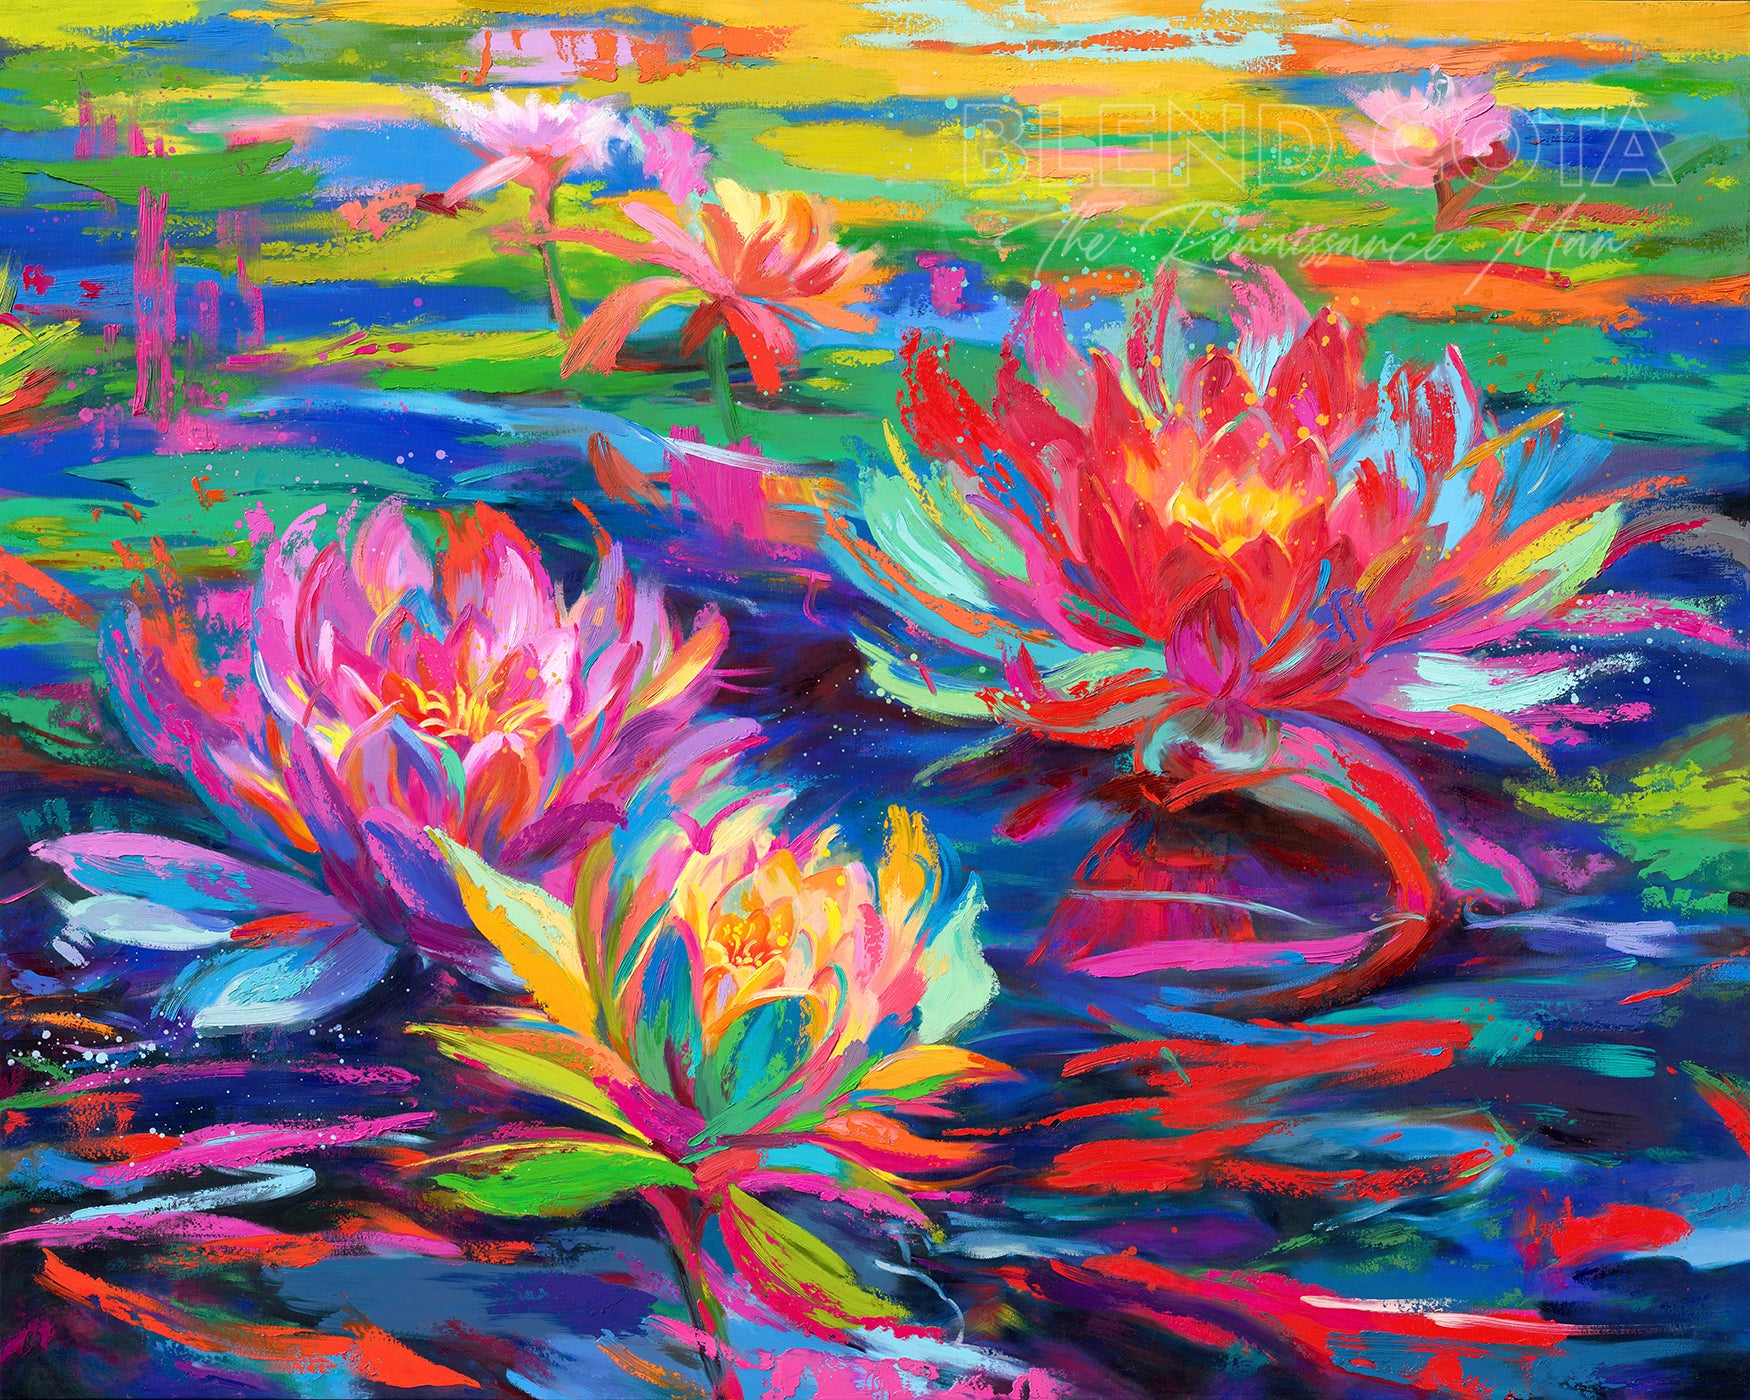 Art print of red, pink and yellow water lilies blooming in a pond of lily pads, abundant and vibrant flowers in colorful brushstrokes, color expressionism style.